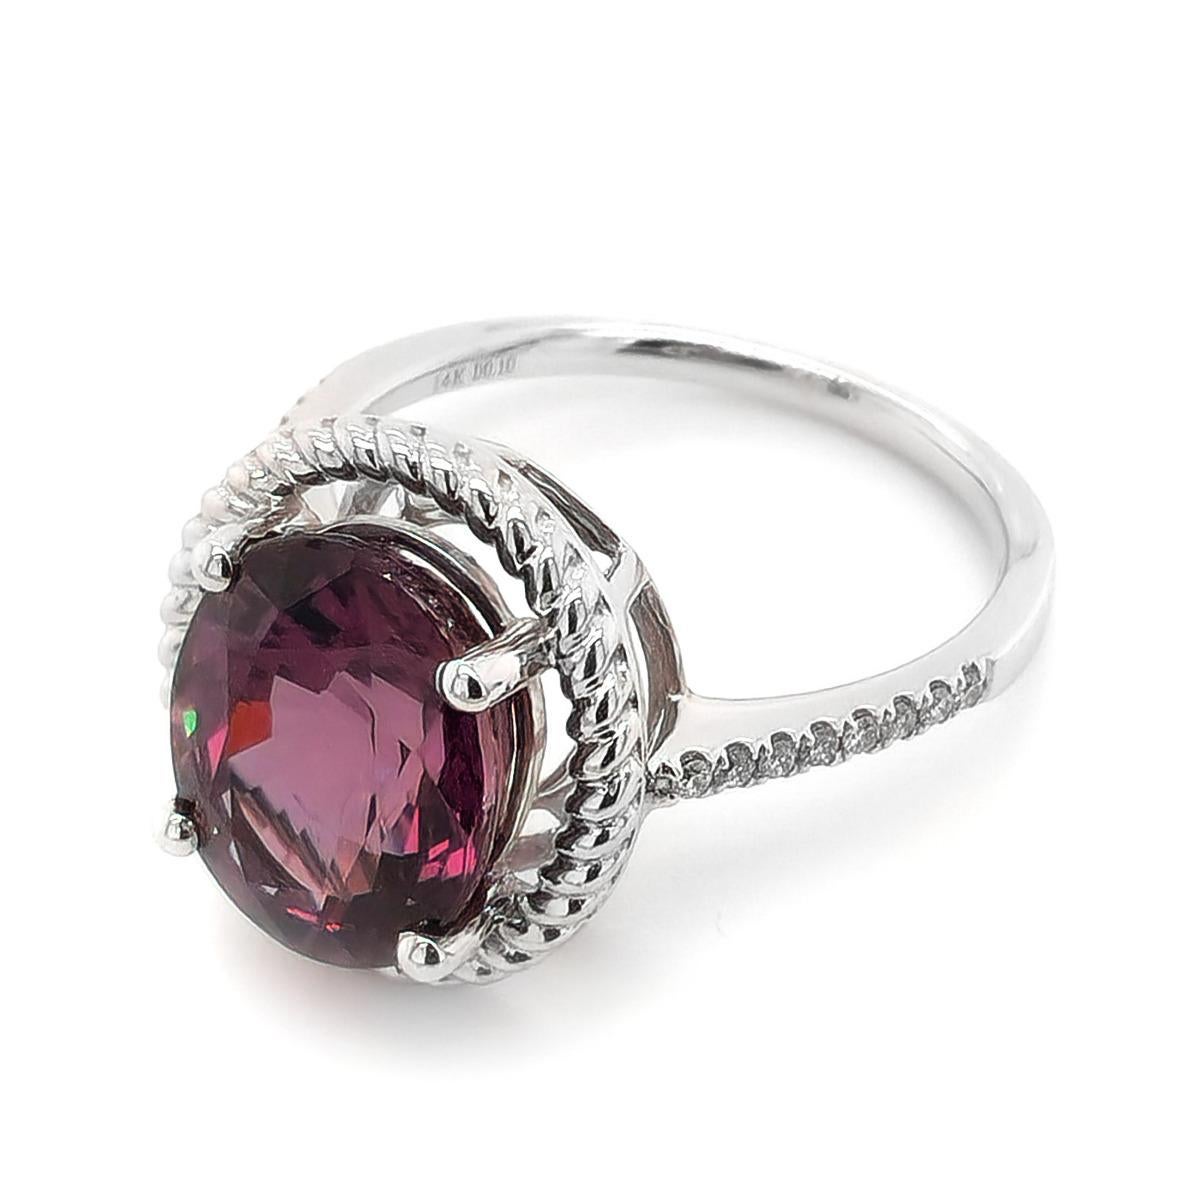 Oval shaped and filled with brilliance and shine, this color change Garnet will steal her heart. The popular trending shape that elongates and the finger is becoming a go to for modern day couples. The 6.35 carat centrally set eye clean gem alters